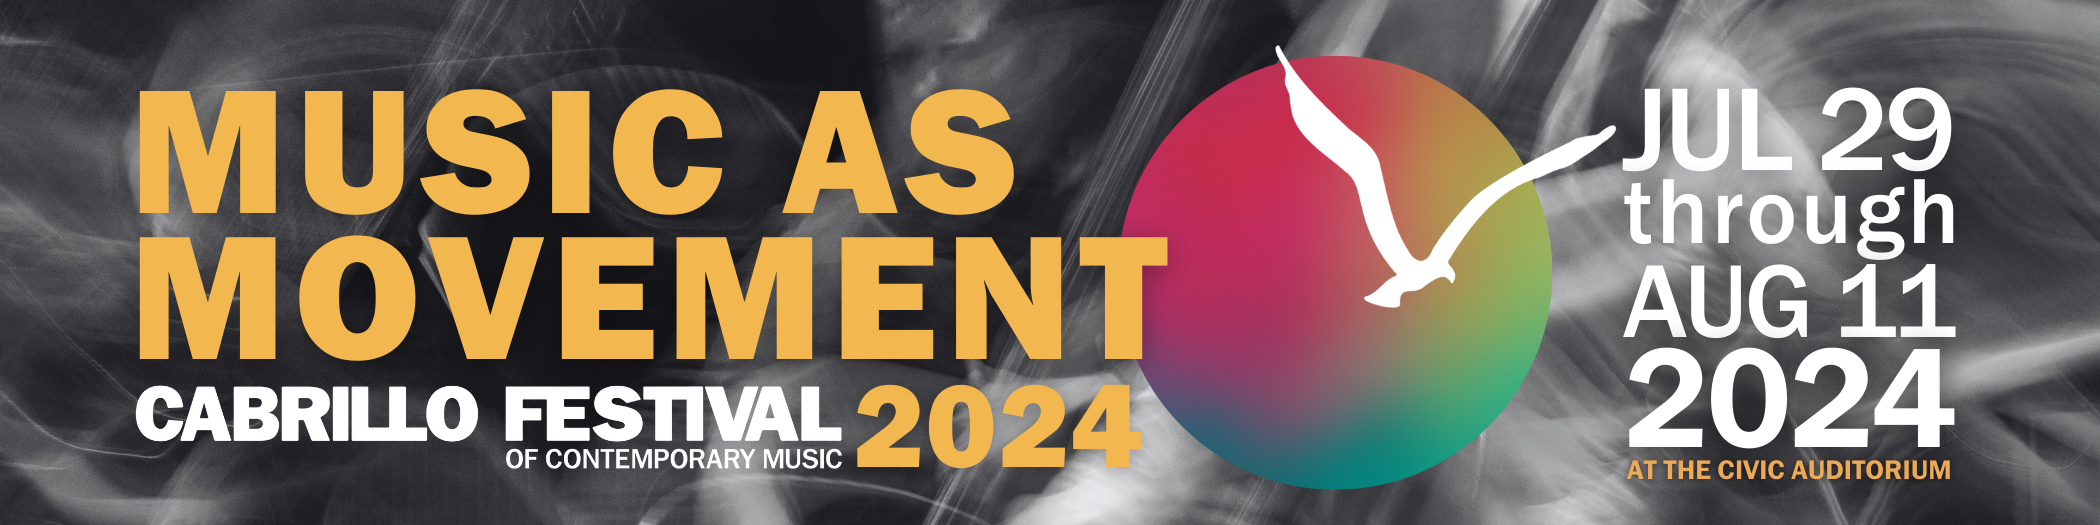 Music as Movement- Cabrillo Festival 2024, July 29 through August 11, 2024